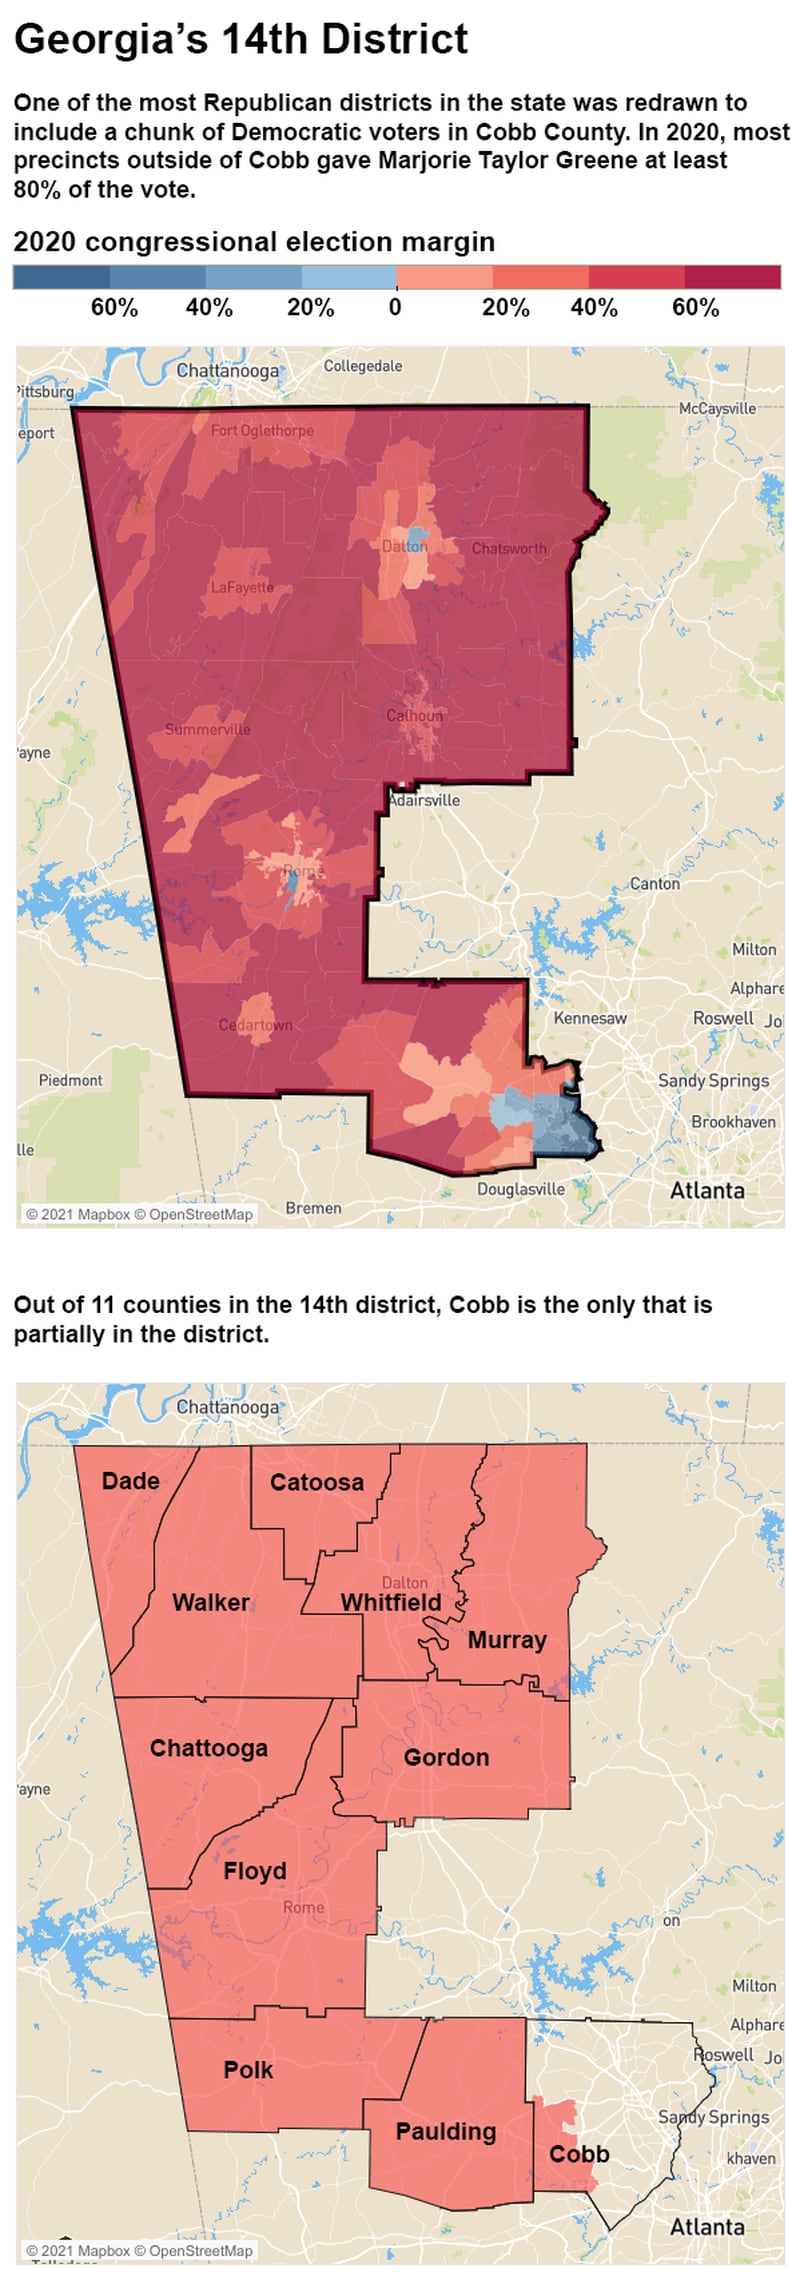 Georgia's 14th Congressional District was redrawn to include a portion of Democratic leaning Cobb County.